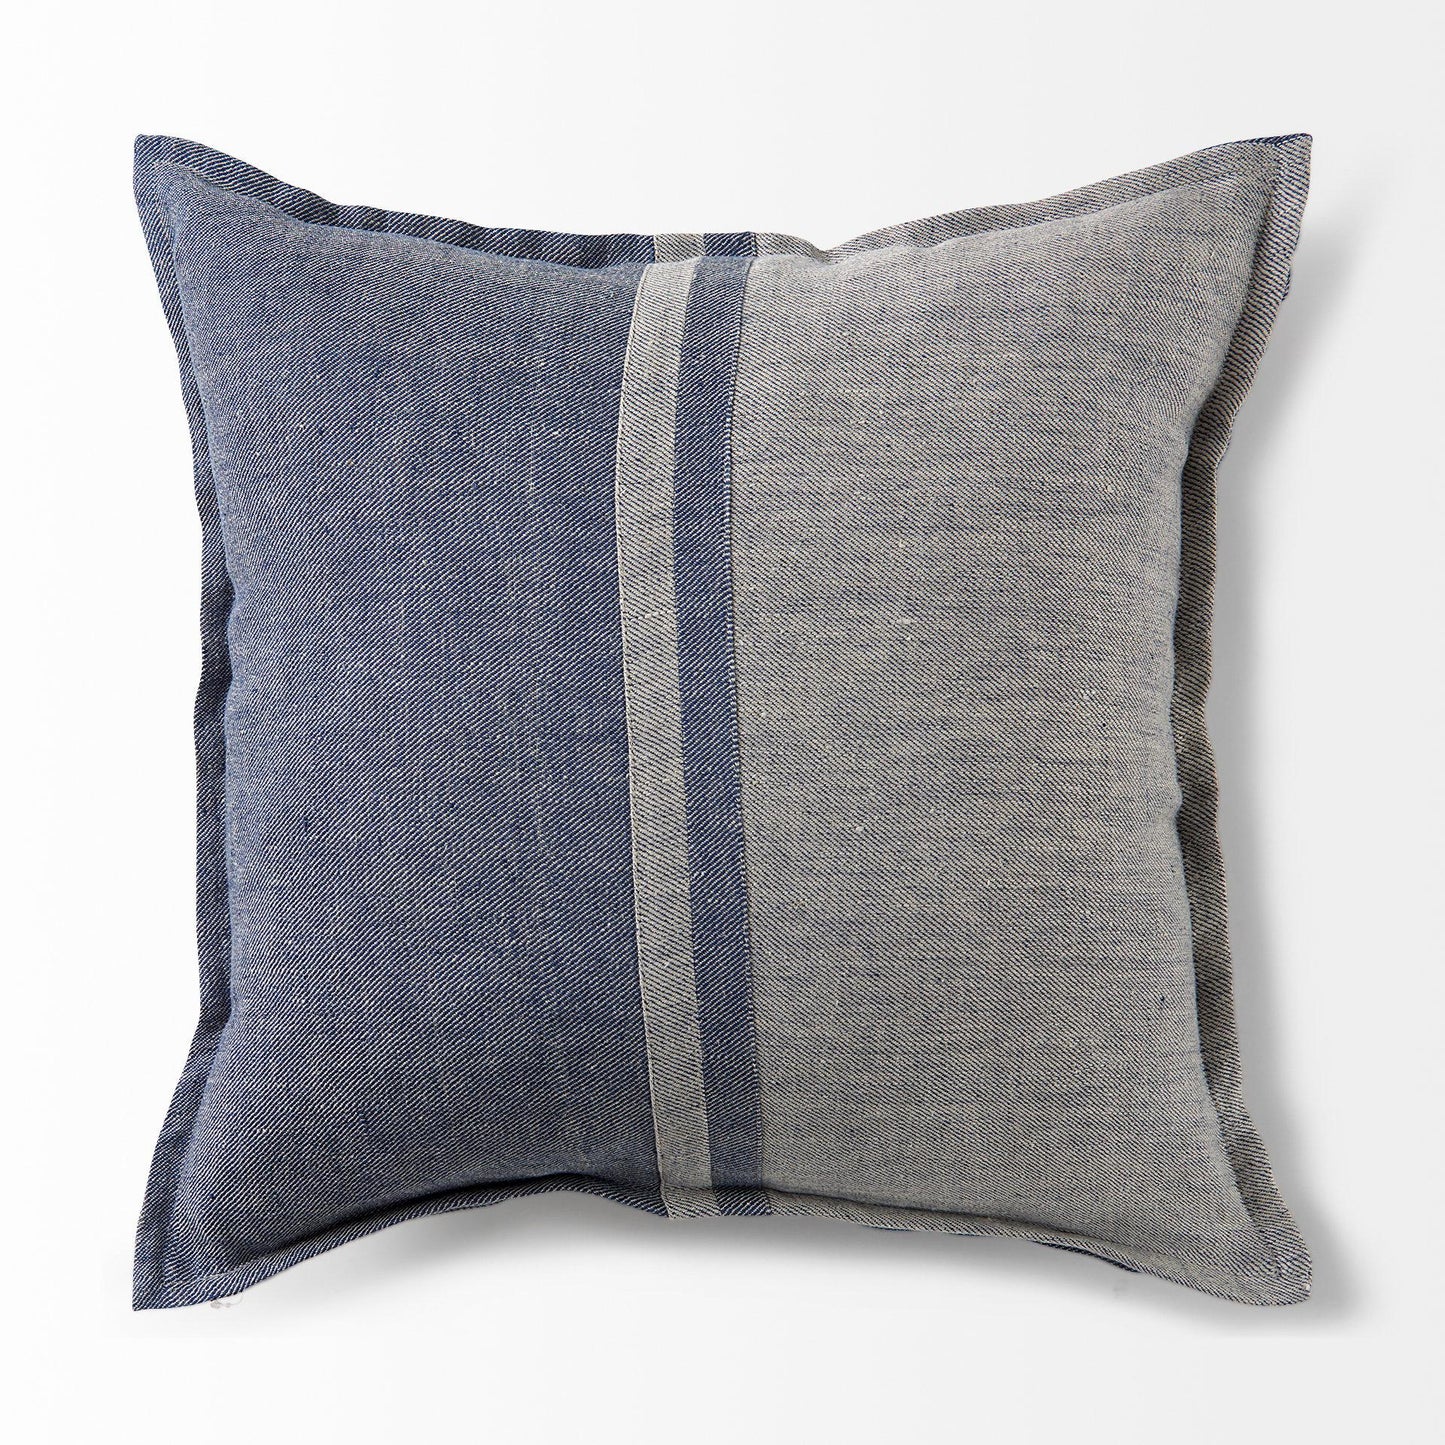 Aubrielle 20L x 20W Gray and Blue Fabric Color Blocked Decorative Pillow Cover